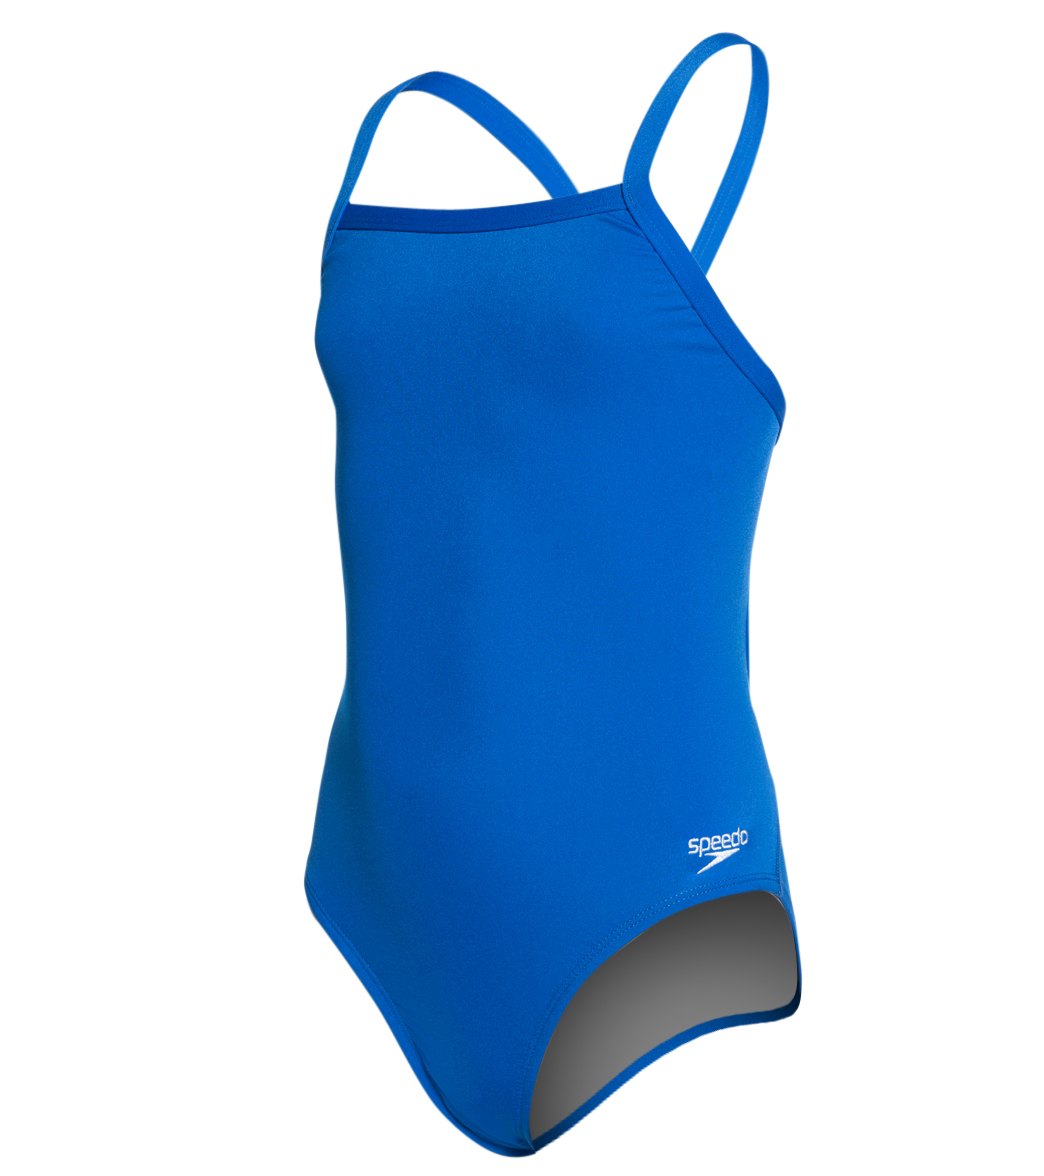 Speedo Girls' Solid Endurance + Flyback Training One Piece Swimsuit - Sapphire 22/6 Polyester/Pbt - Swimoutlet.com